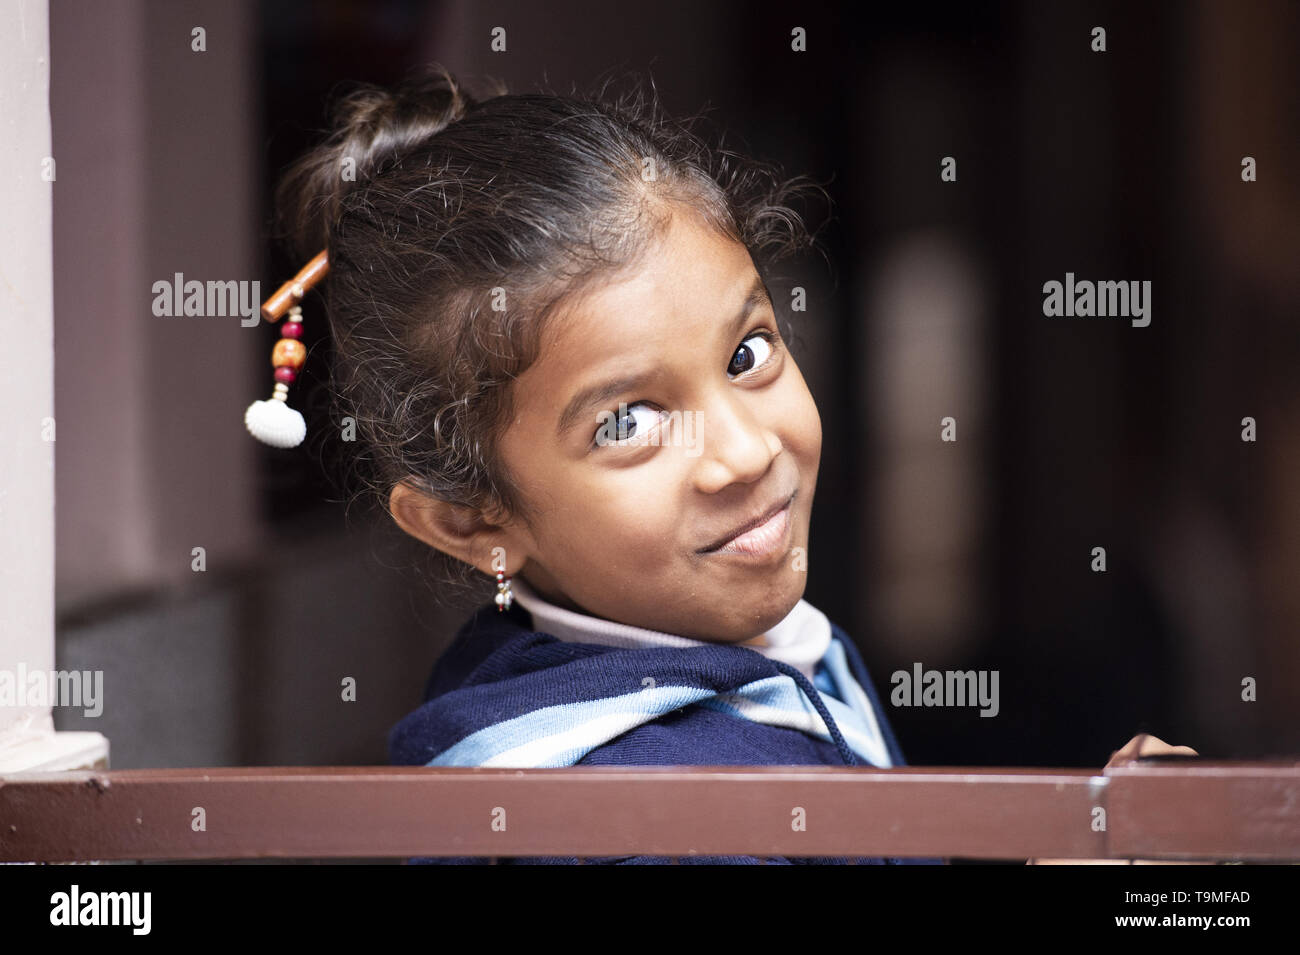 Portrait of a smiling little beautiful child in Varanasi. Varanasi is also known as Benares. Stock Photo